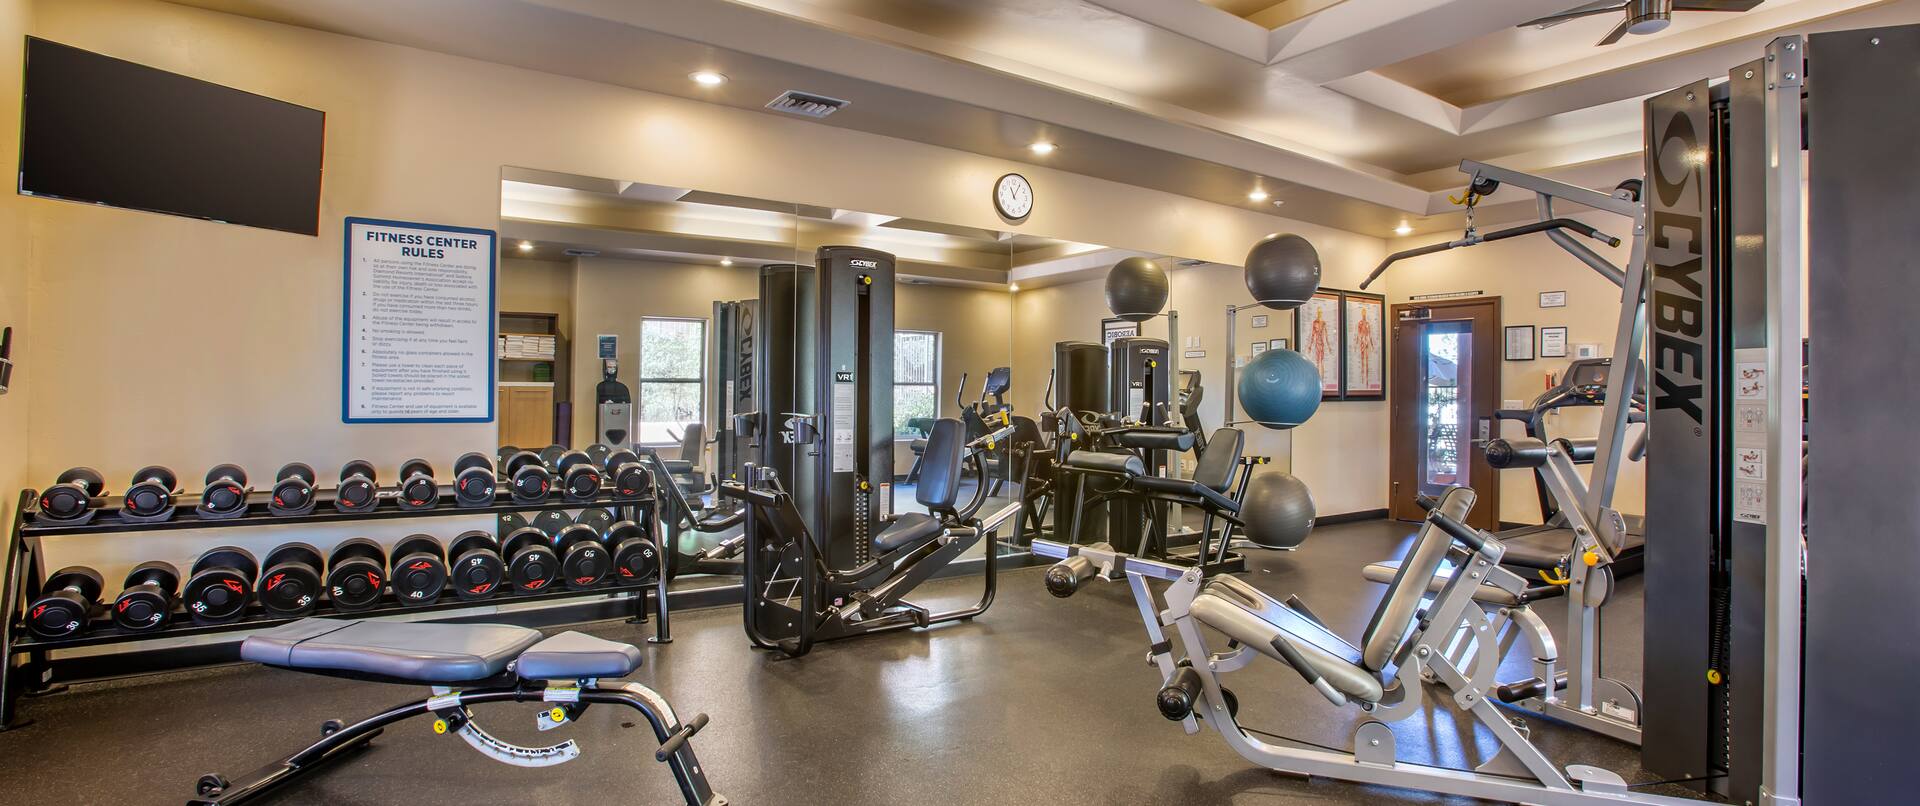 Fitness Center with Weights and Other Exercise Equipment